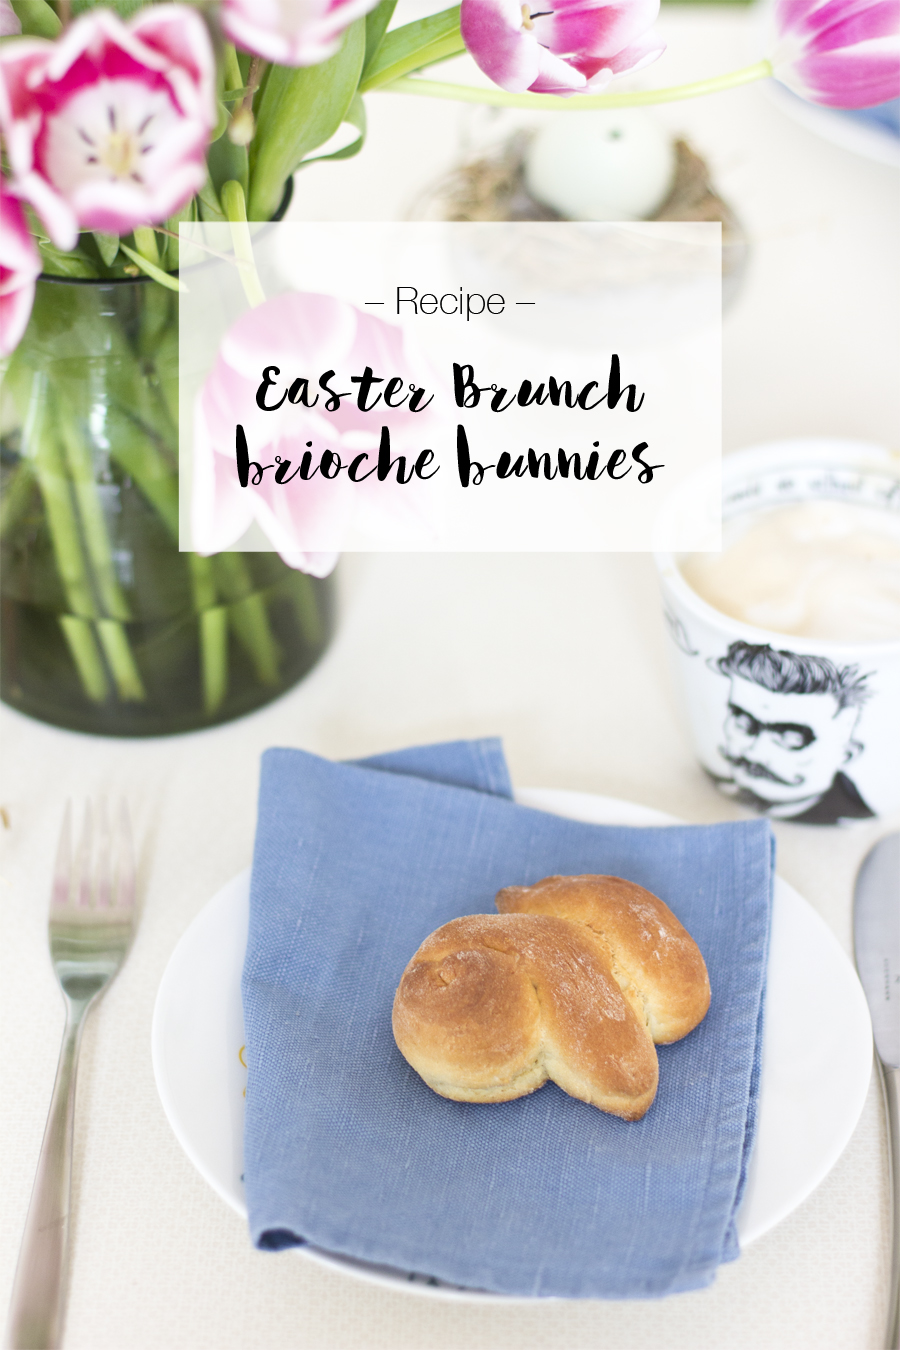 Easter brioche bunnies recipe | LOOK WHAT I MADE ...